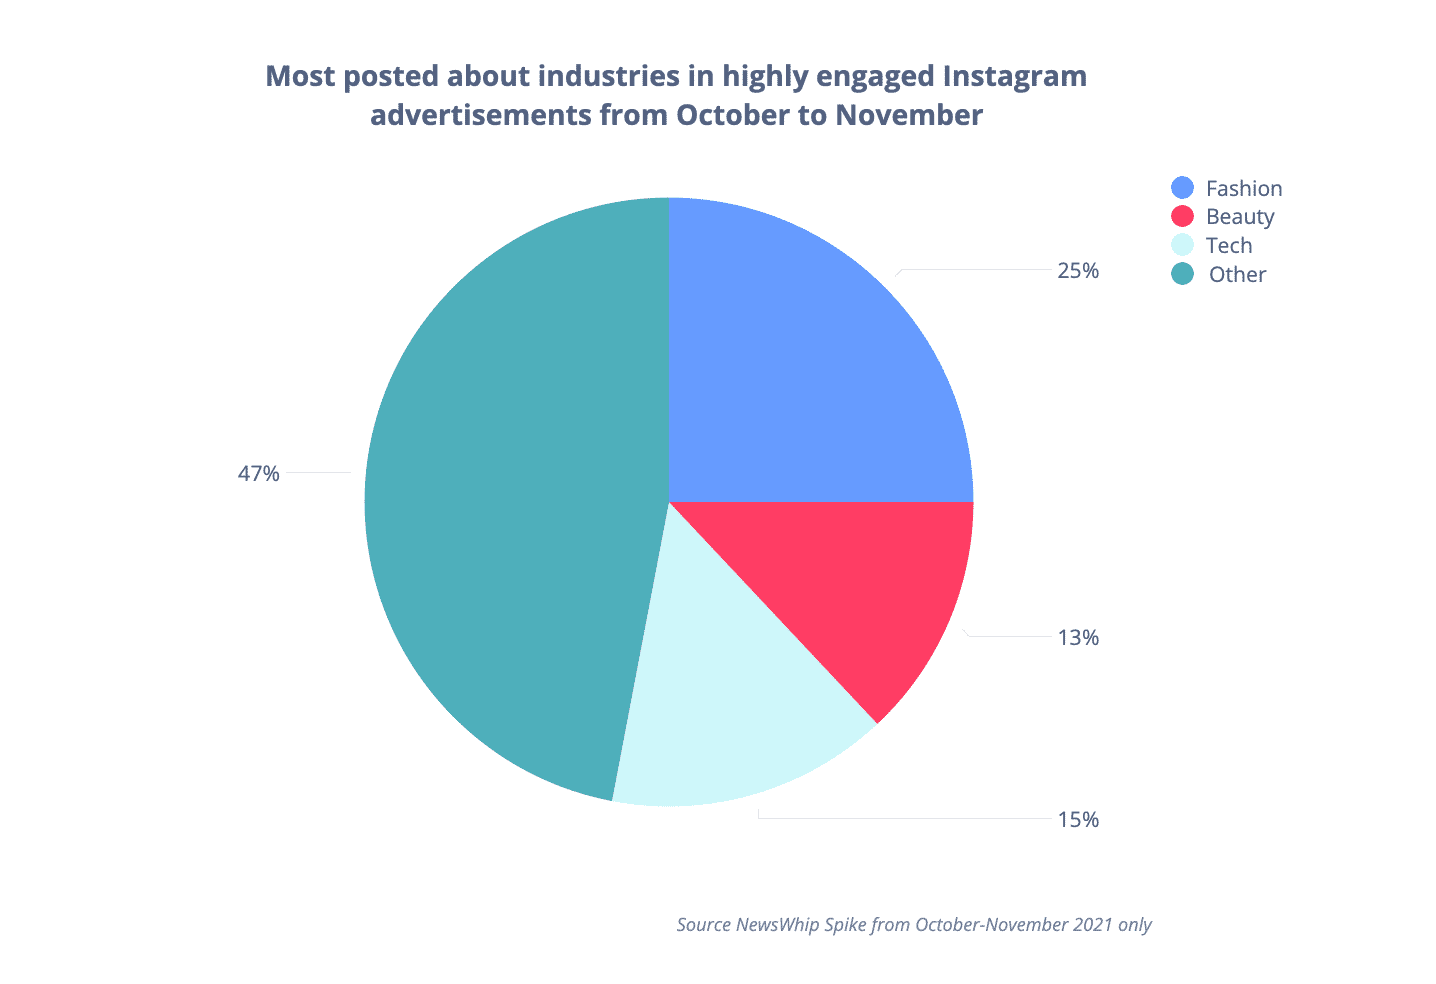 Pie chart showing the most popular industries on Instagram for ad posts